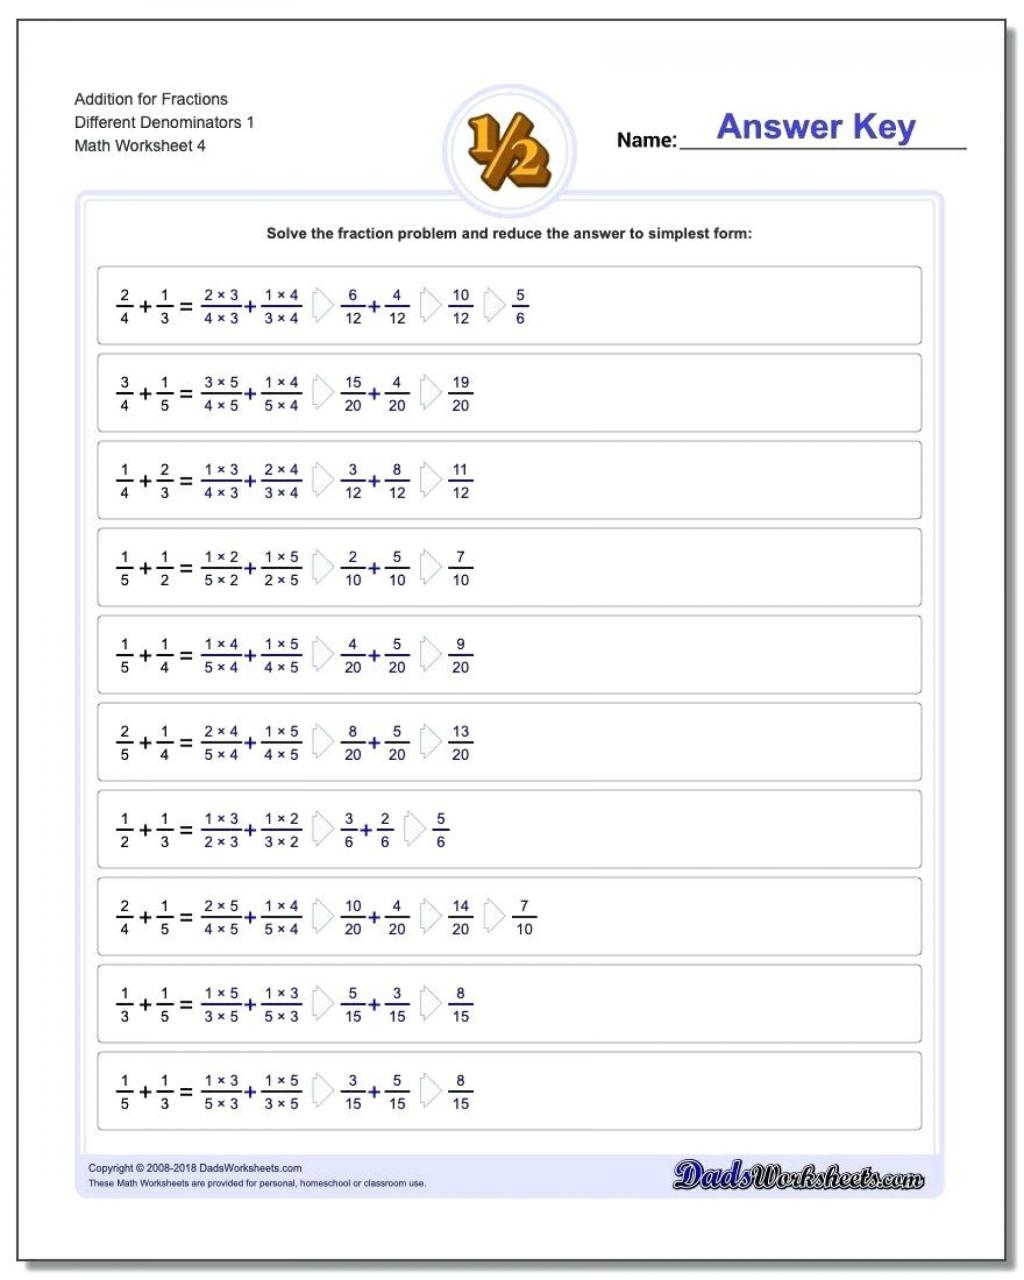 Dividing Fractions By Unit Fractions Worksheets